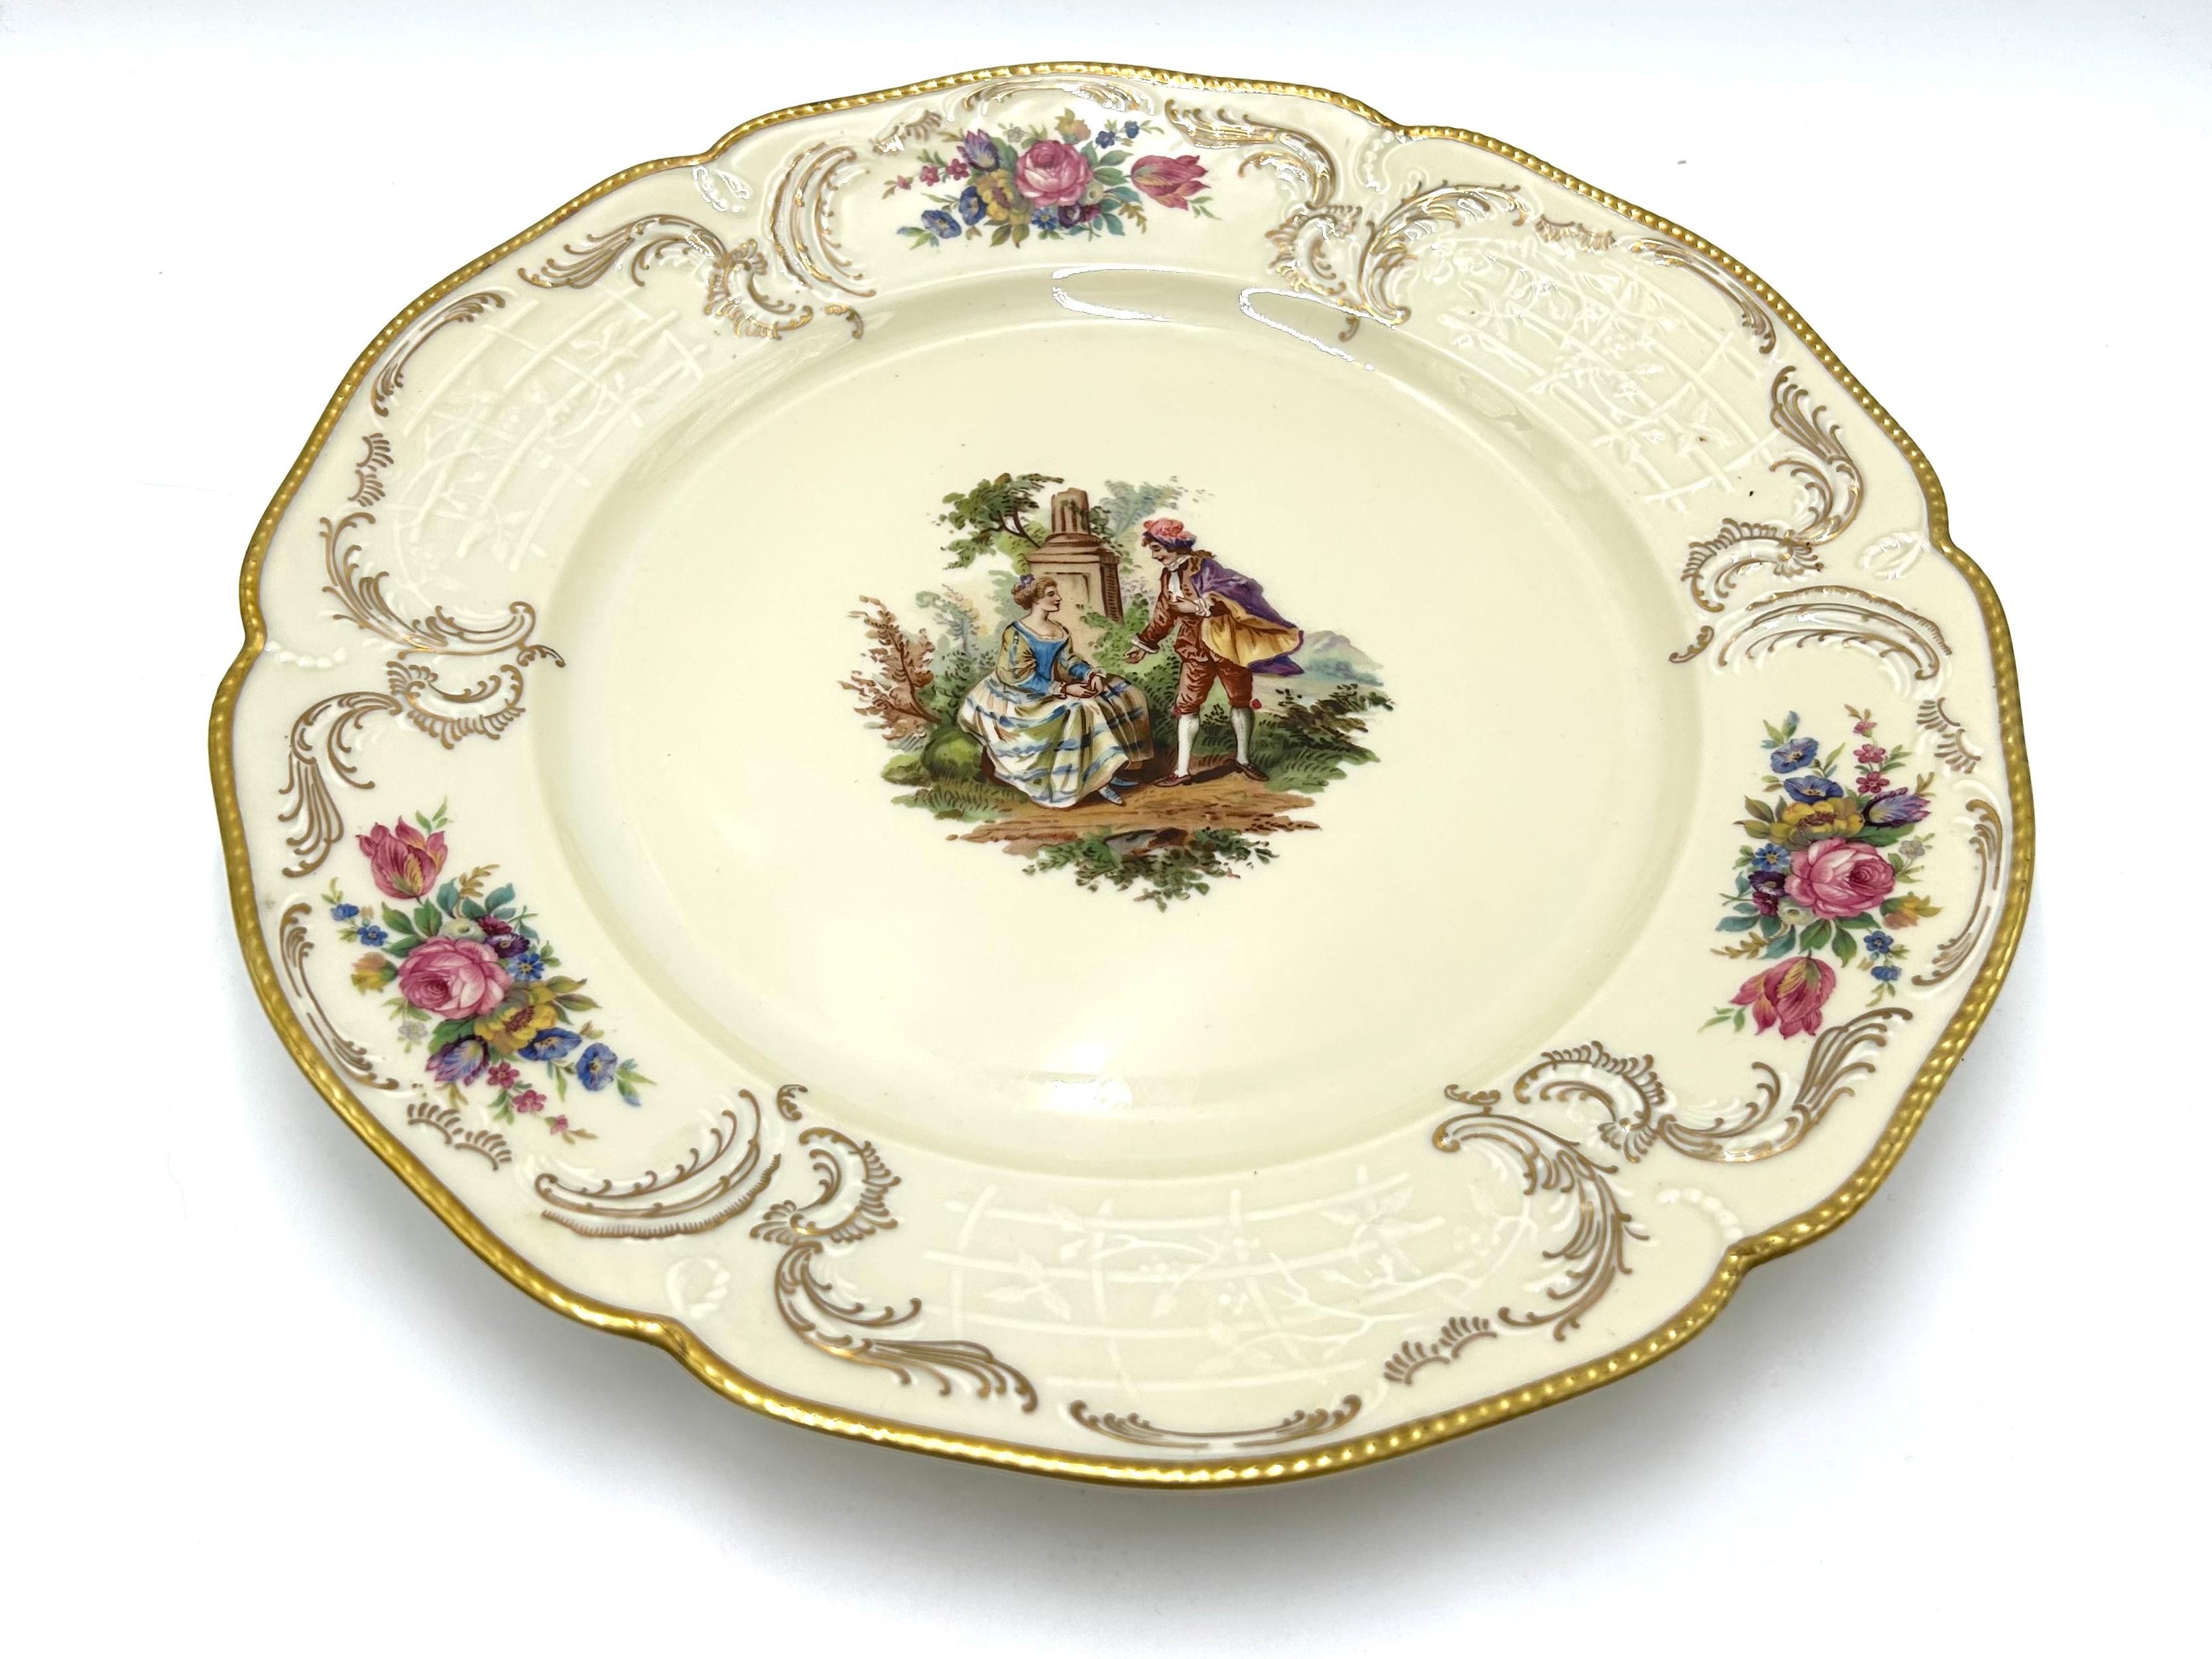 Porcelain plate, a product of the Sanssouci series of the valued German Rosenthal label.
Porcelain in ecru color, decorated with gilding, motif of floral bouquets and a genre scene. Signed with the mark of the manufacturer from 1946
Measures: